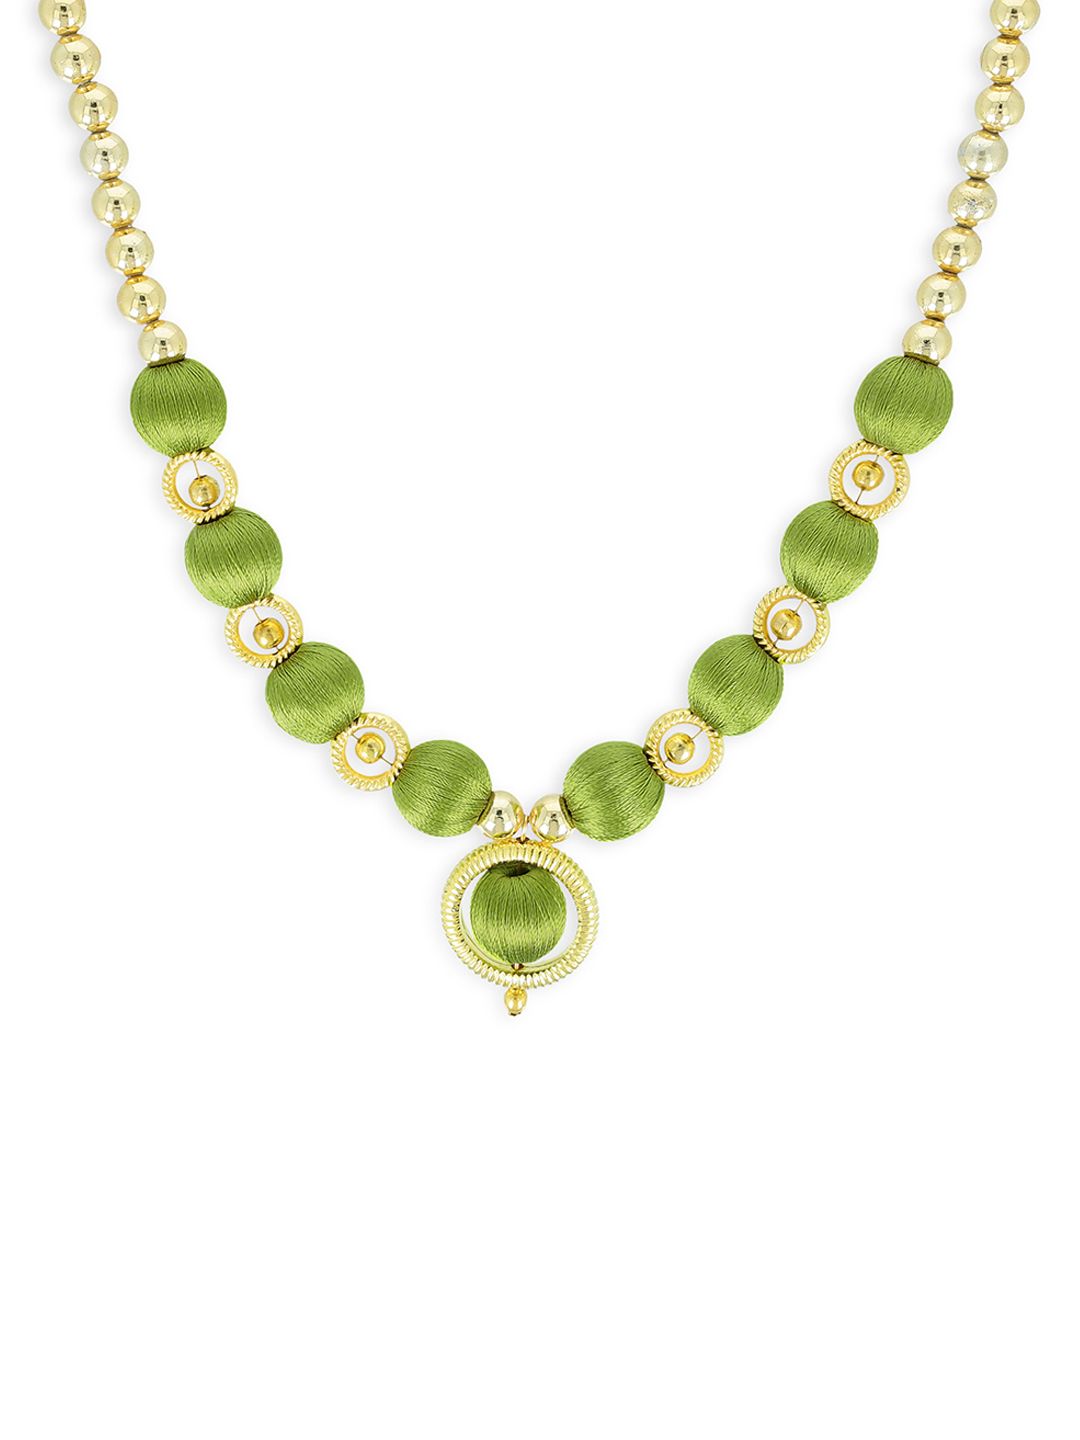 AKSHARA Gold-Toned And Green Handcrafted Beaded Necklace Price in India